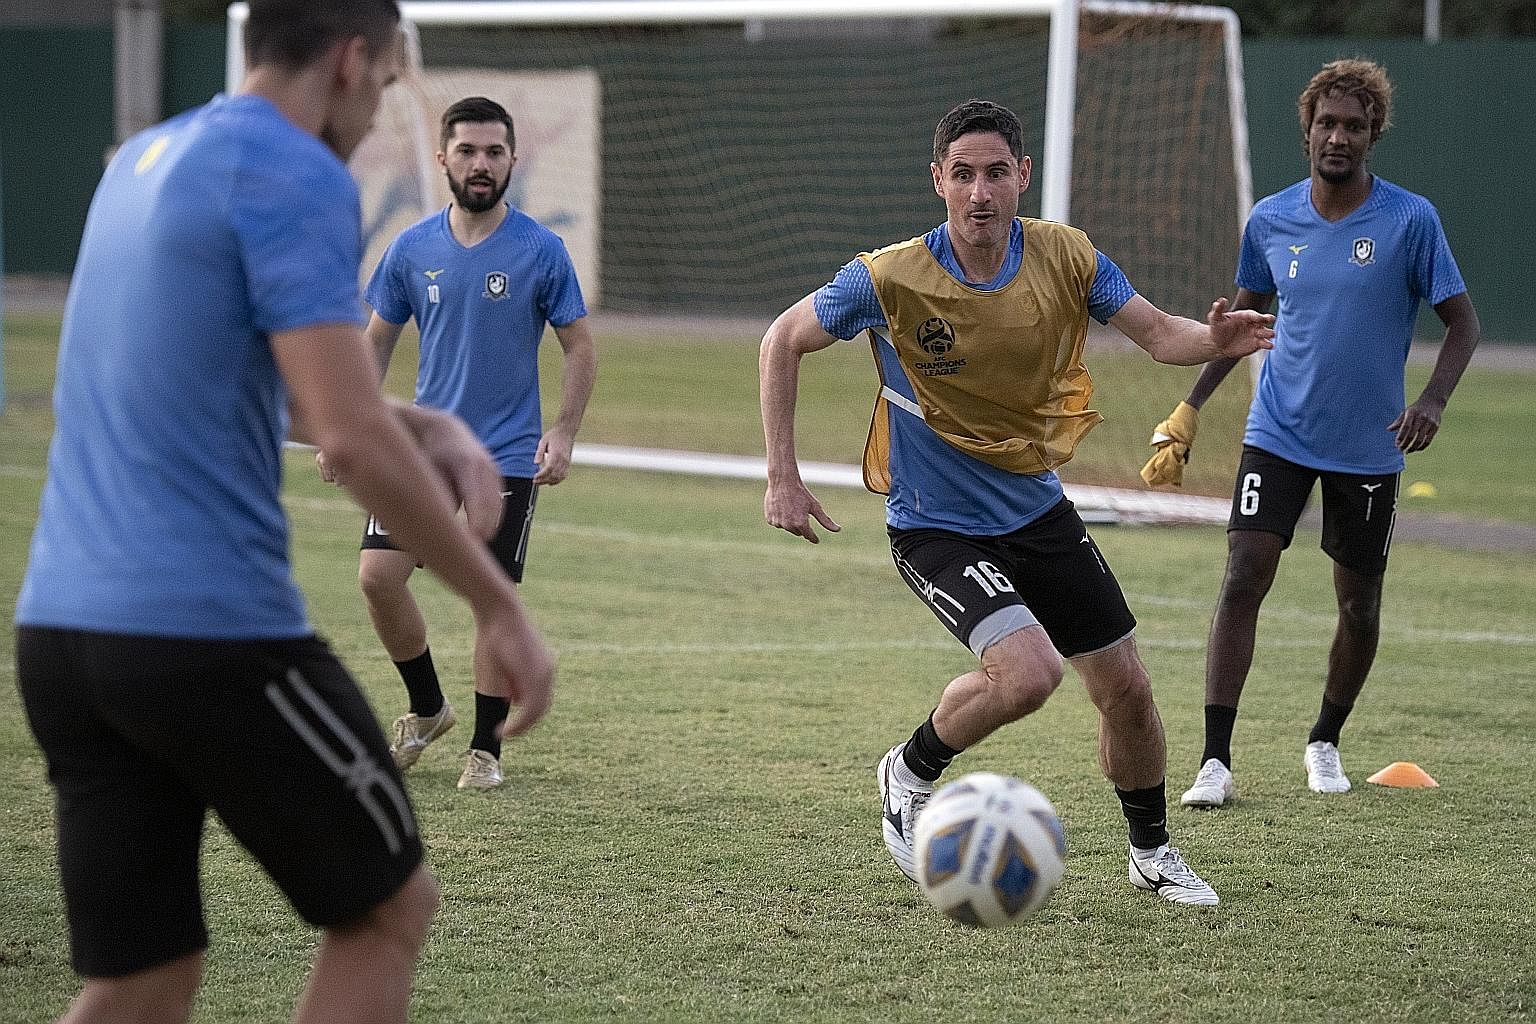 Tampines veteran Daniel Bennett (in bib) chasing the ball down during a training session at Yakkasaray Stadium in Tashkent on Tuesday ahead of today's clash with Gamba Osaka. He endured back-to-back losses against the Japanese giants during his time 